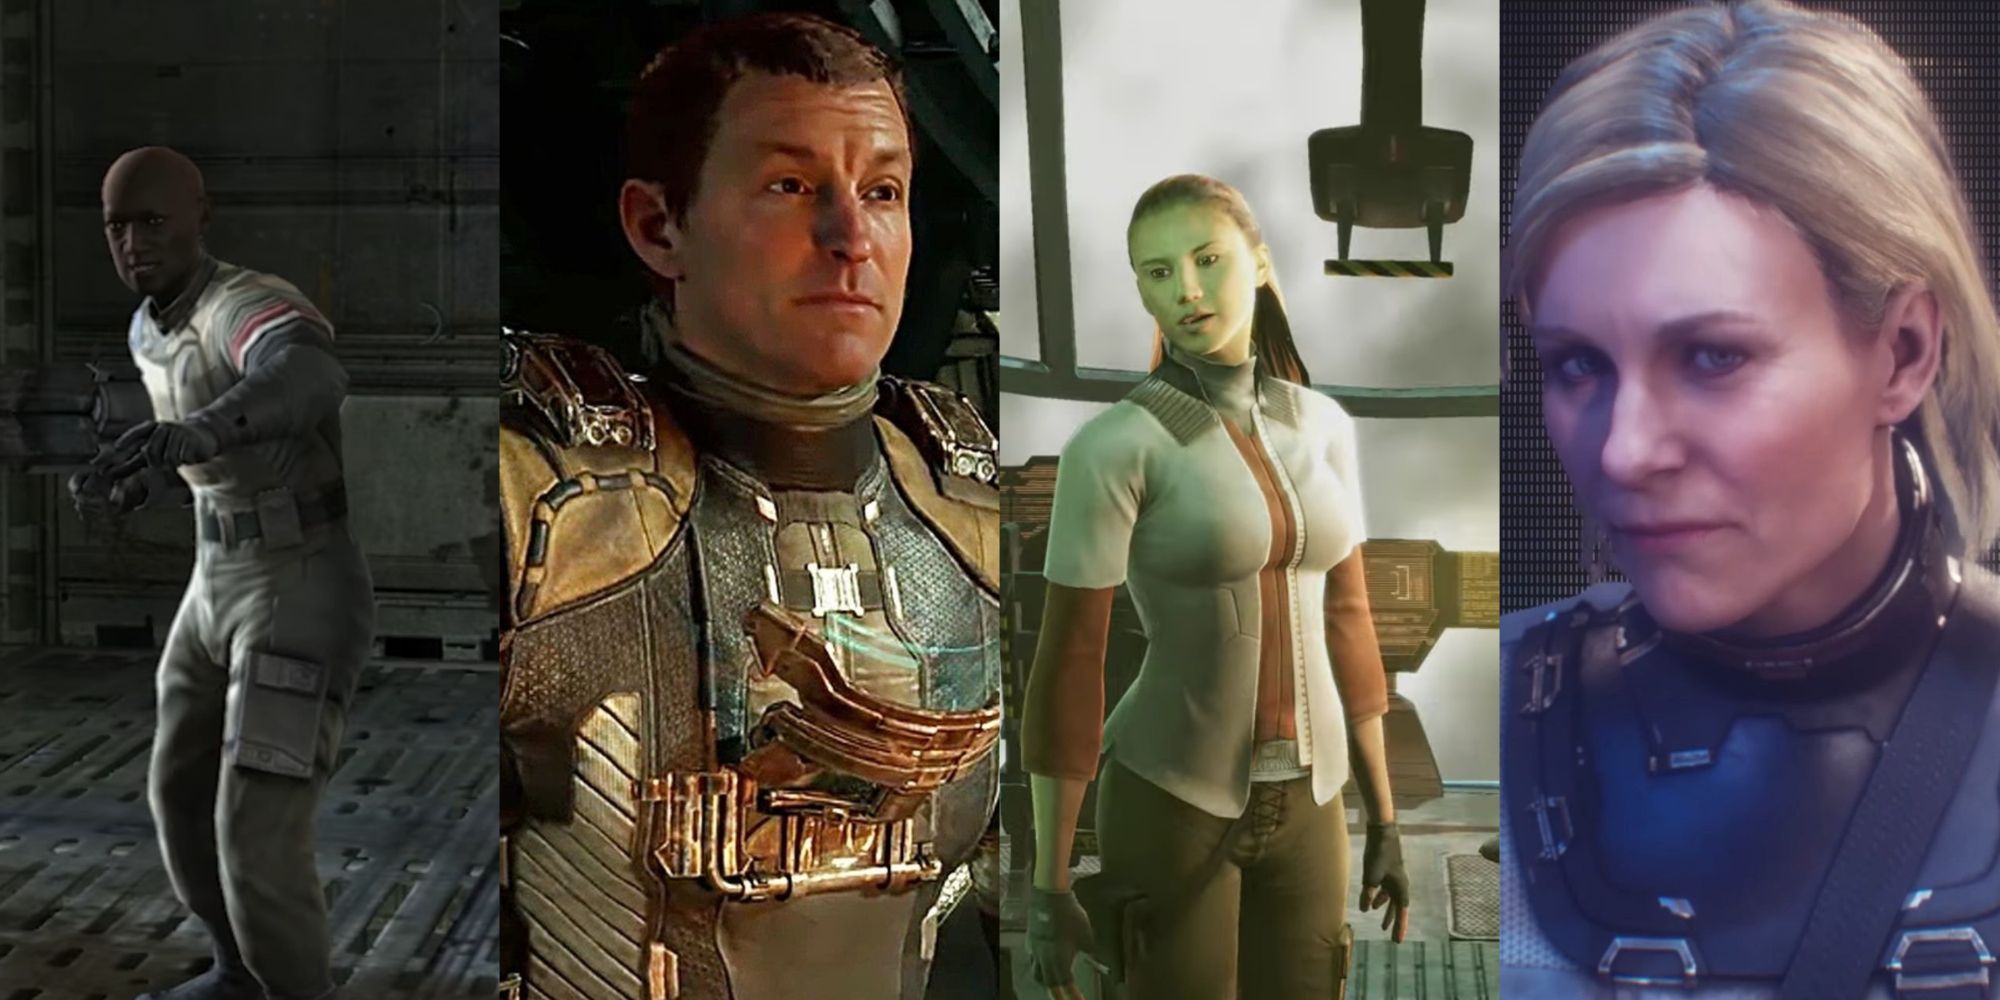 A four-image collage of Zach Hammond from Dead Space 2008, Isaac from the Remake, Kendra Daniels from the 2008 game, and Nicole Brennan from the Remake.